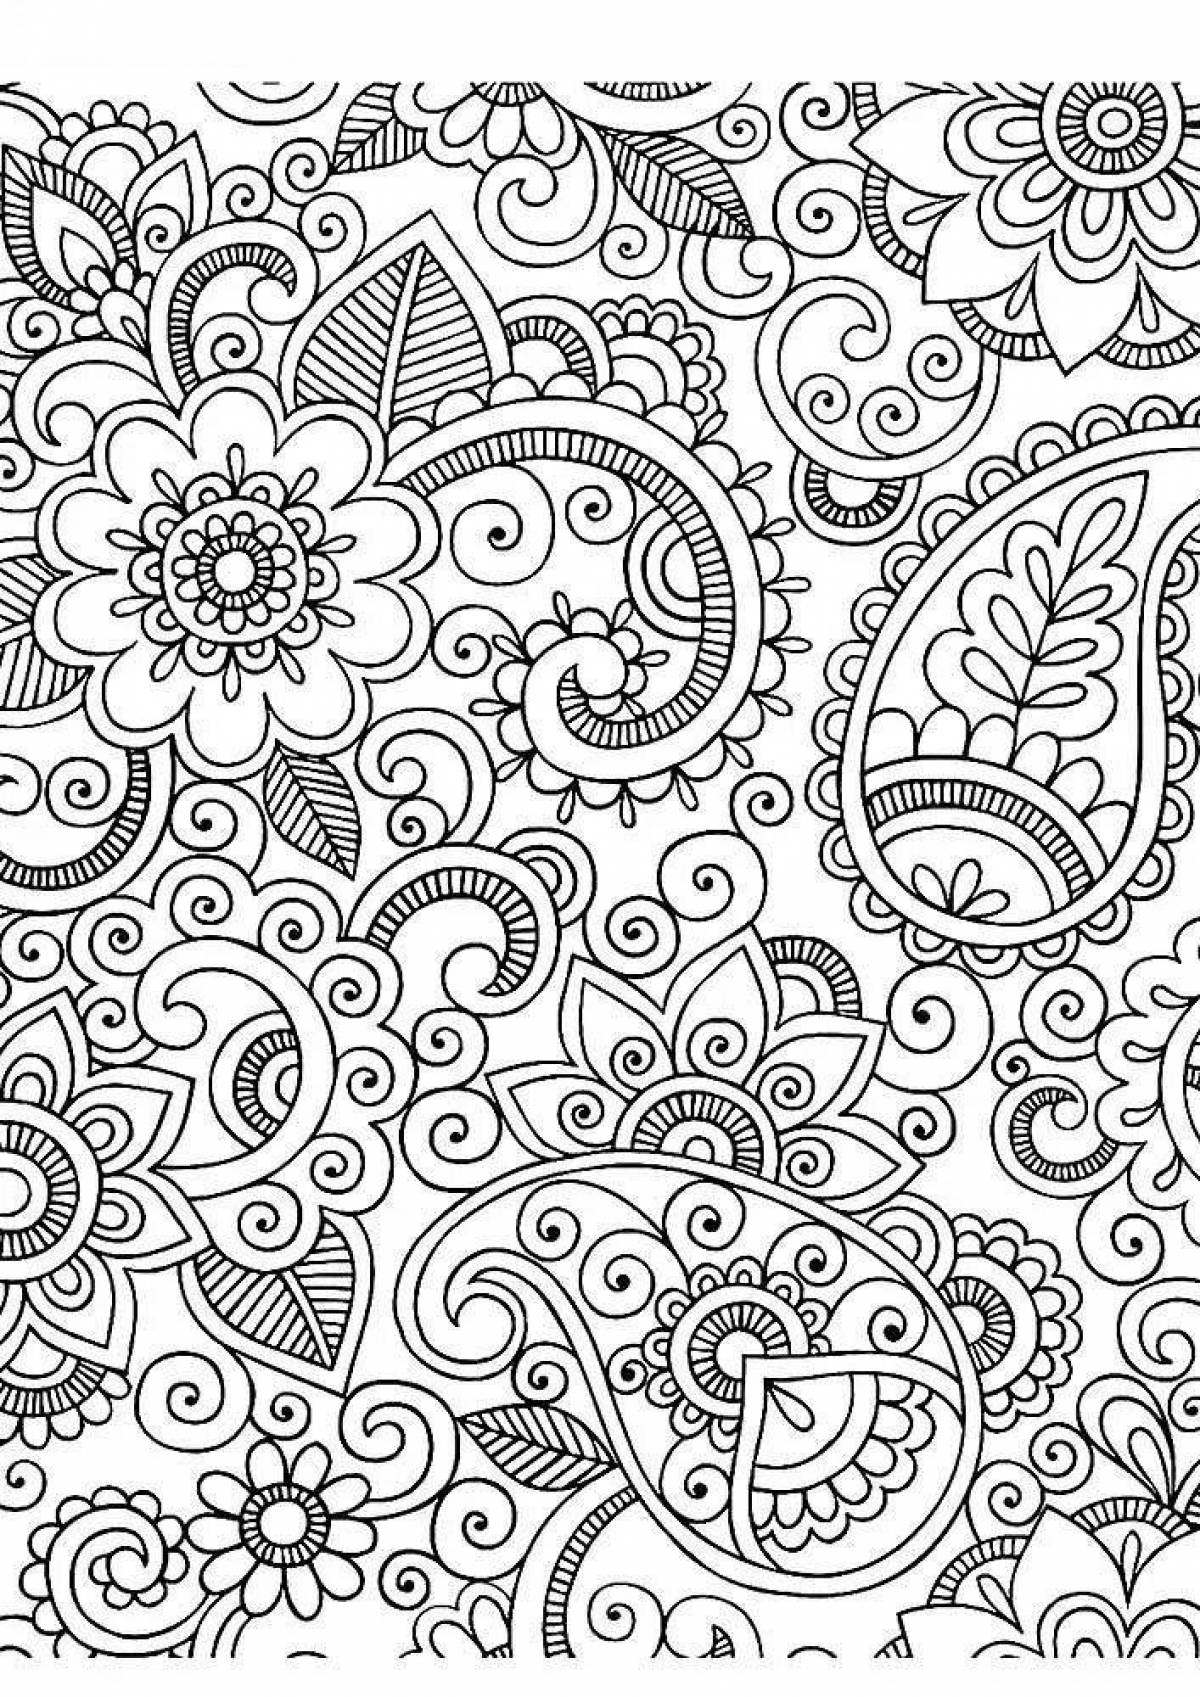 Coloring book stimulating anti-stress art therapy